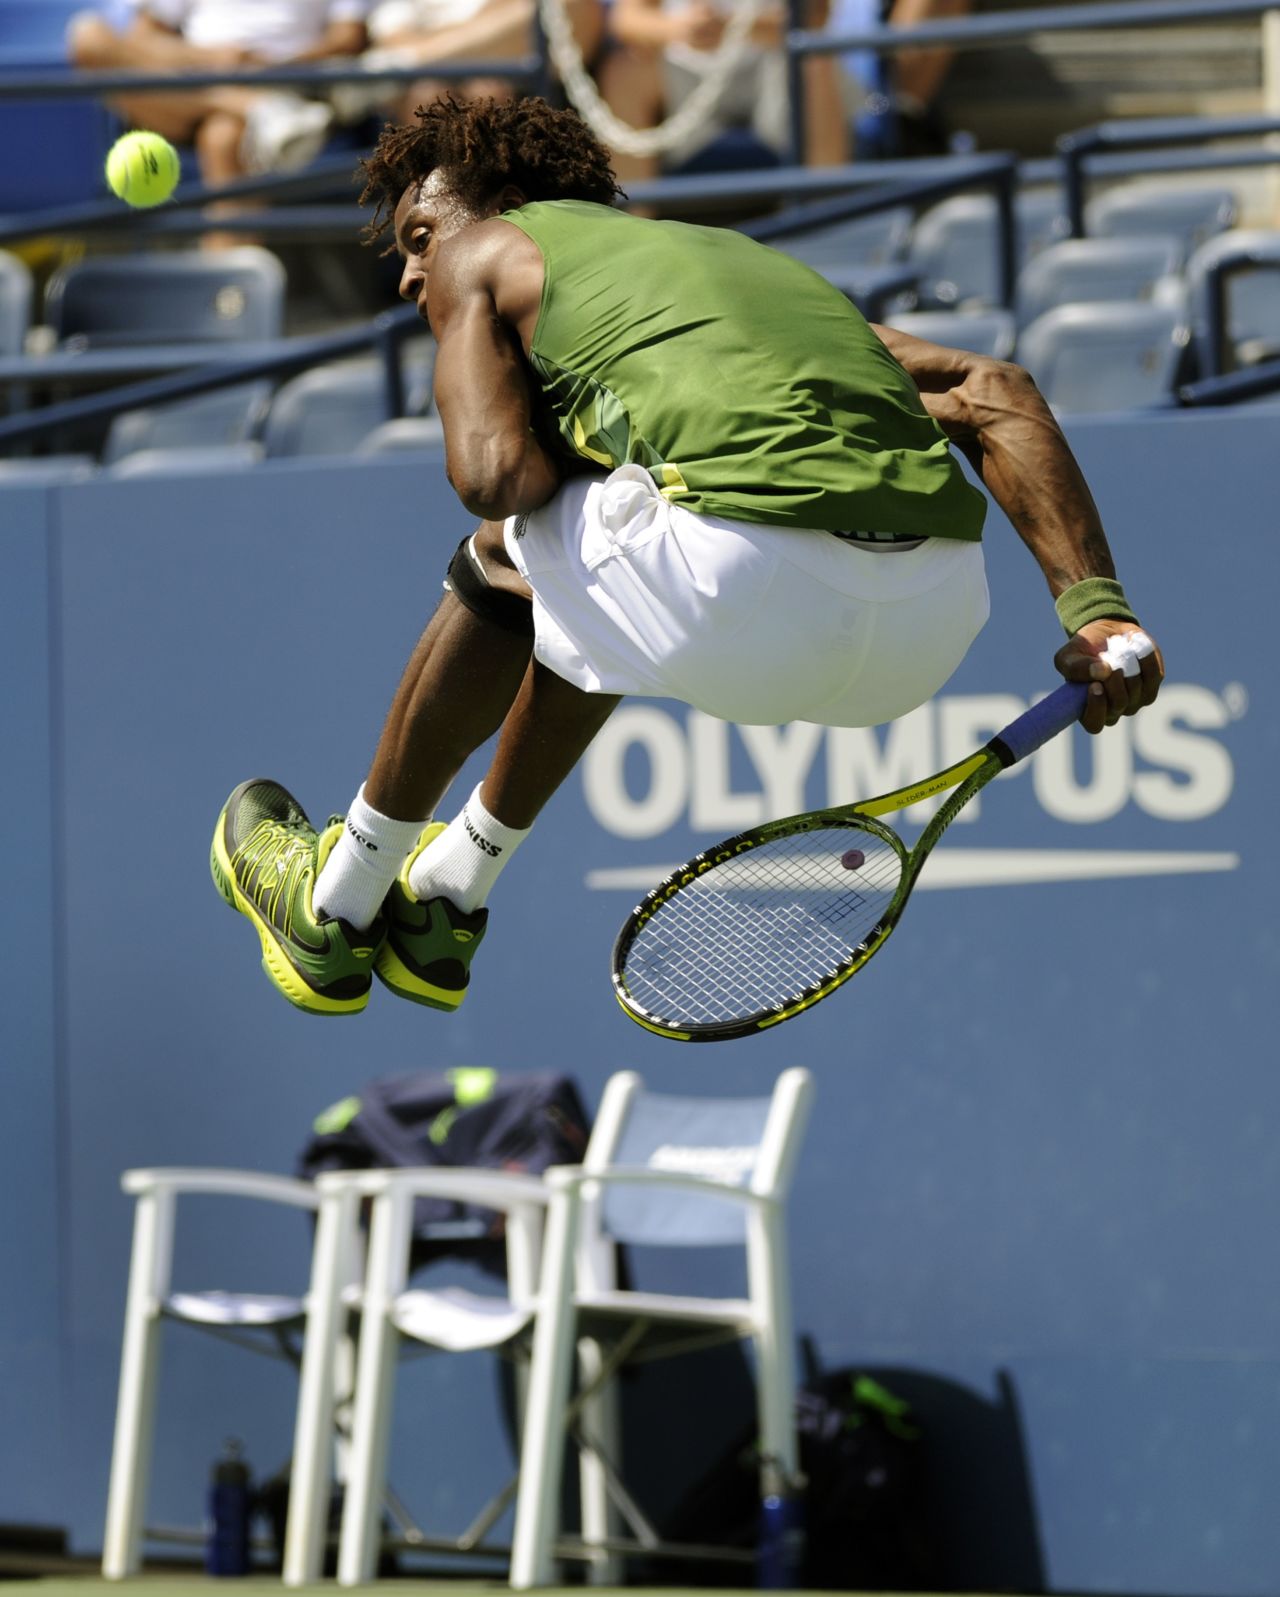 Like Tsonga, the seventh-ranked Monfils excites fans with his athletic ability on the tennis court.